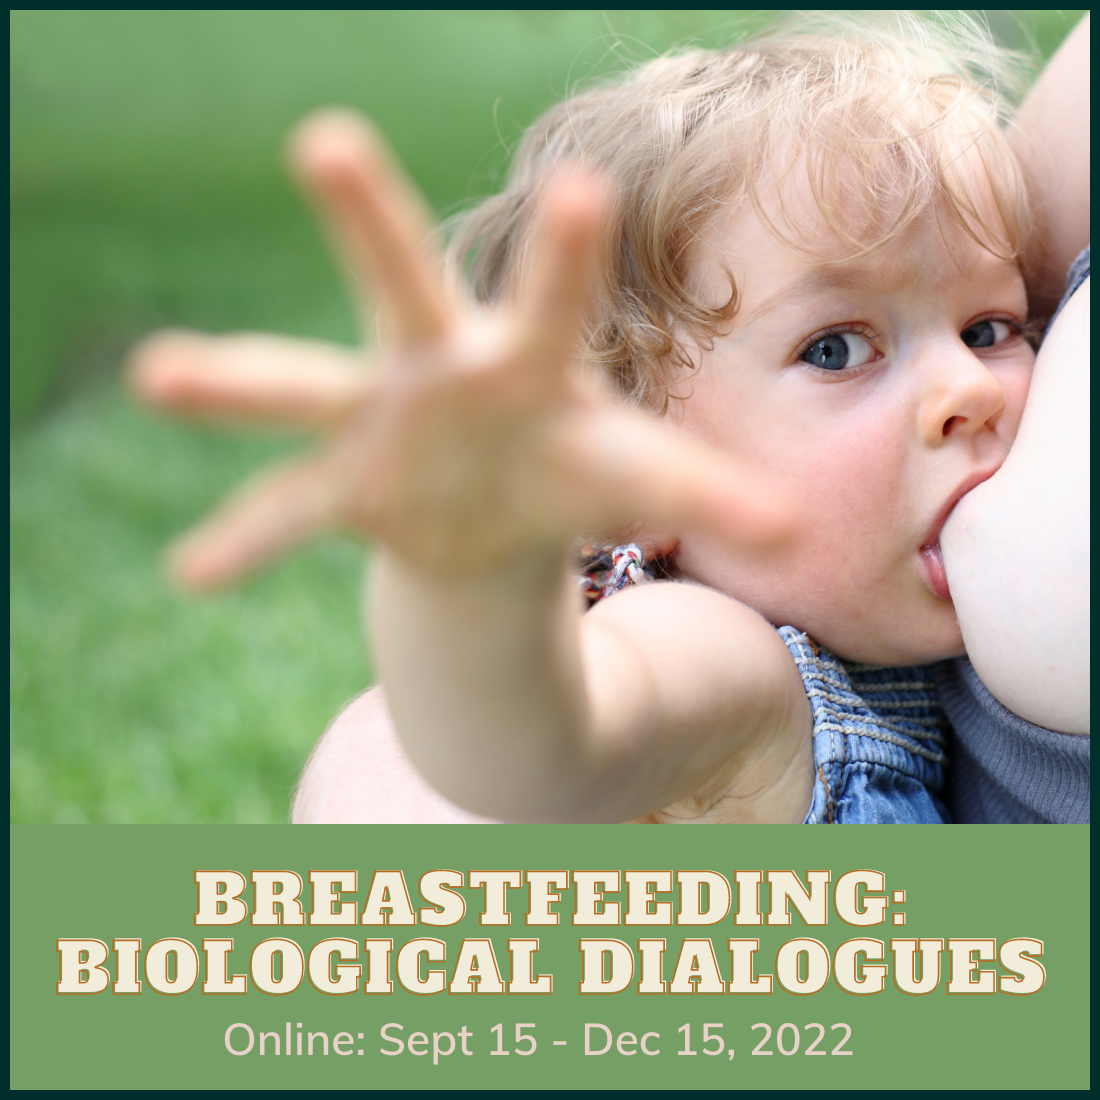 iLactation’s online breastfeeding conference, Breastfeeding: biological dialogues